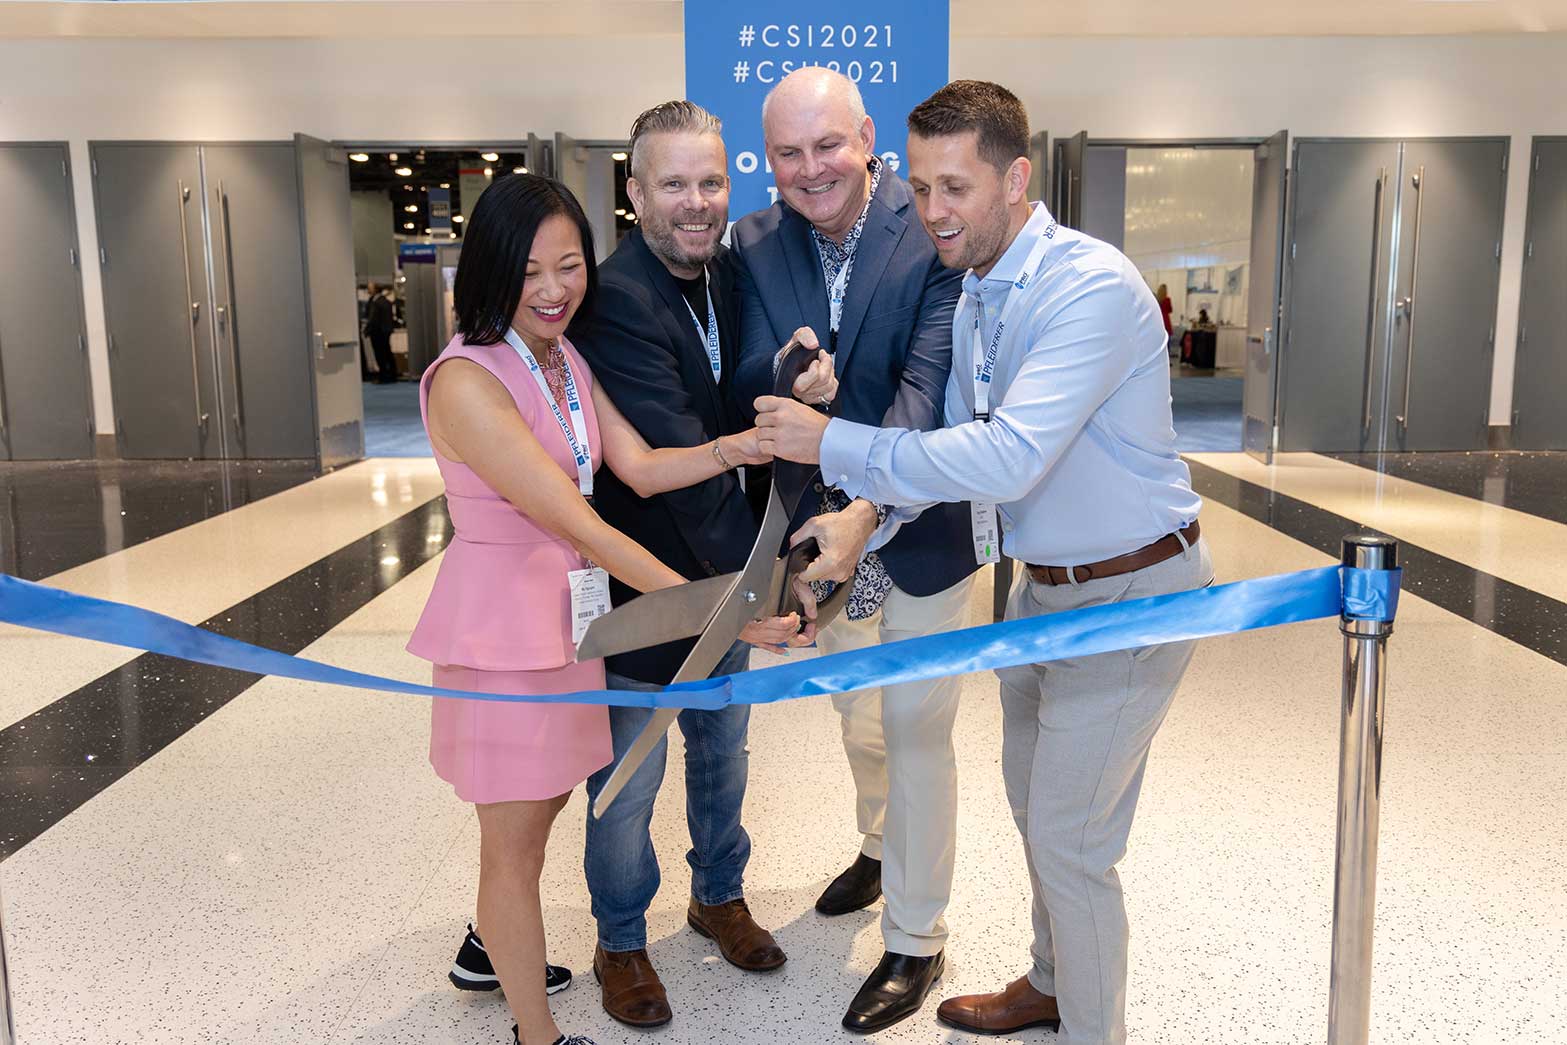 toby walters and the csi advisory board cutting the ribbon at cruise ship interiors expo america